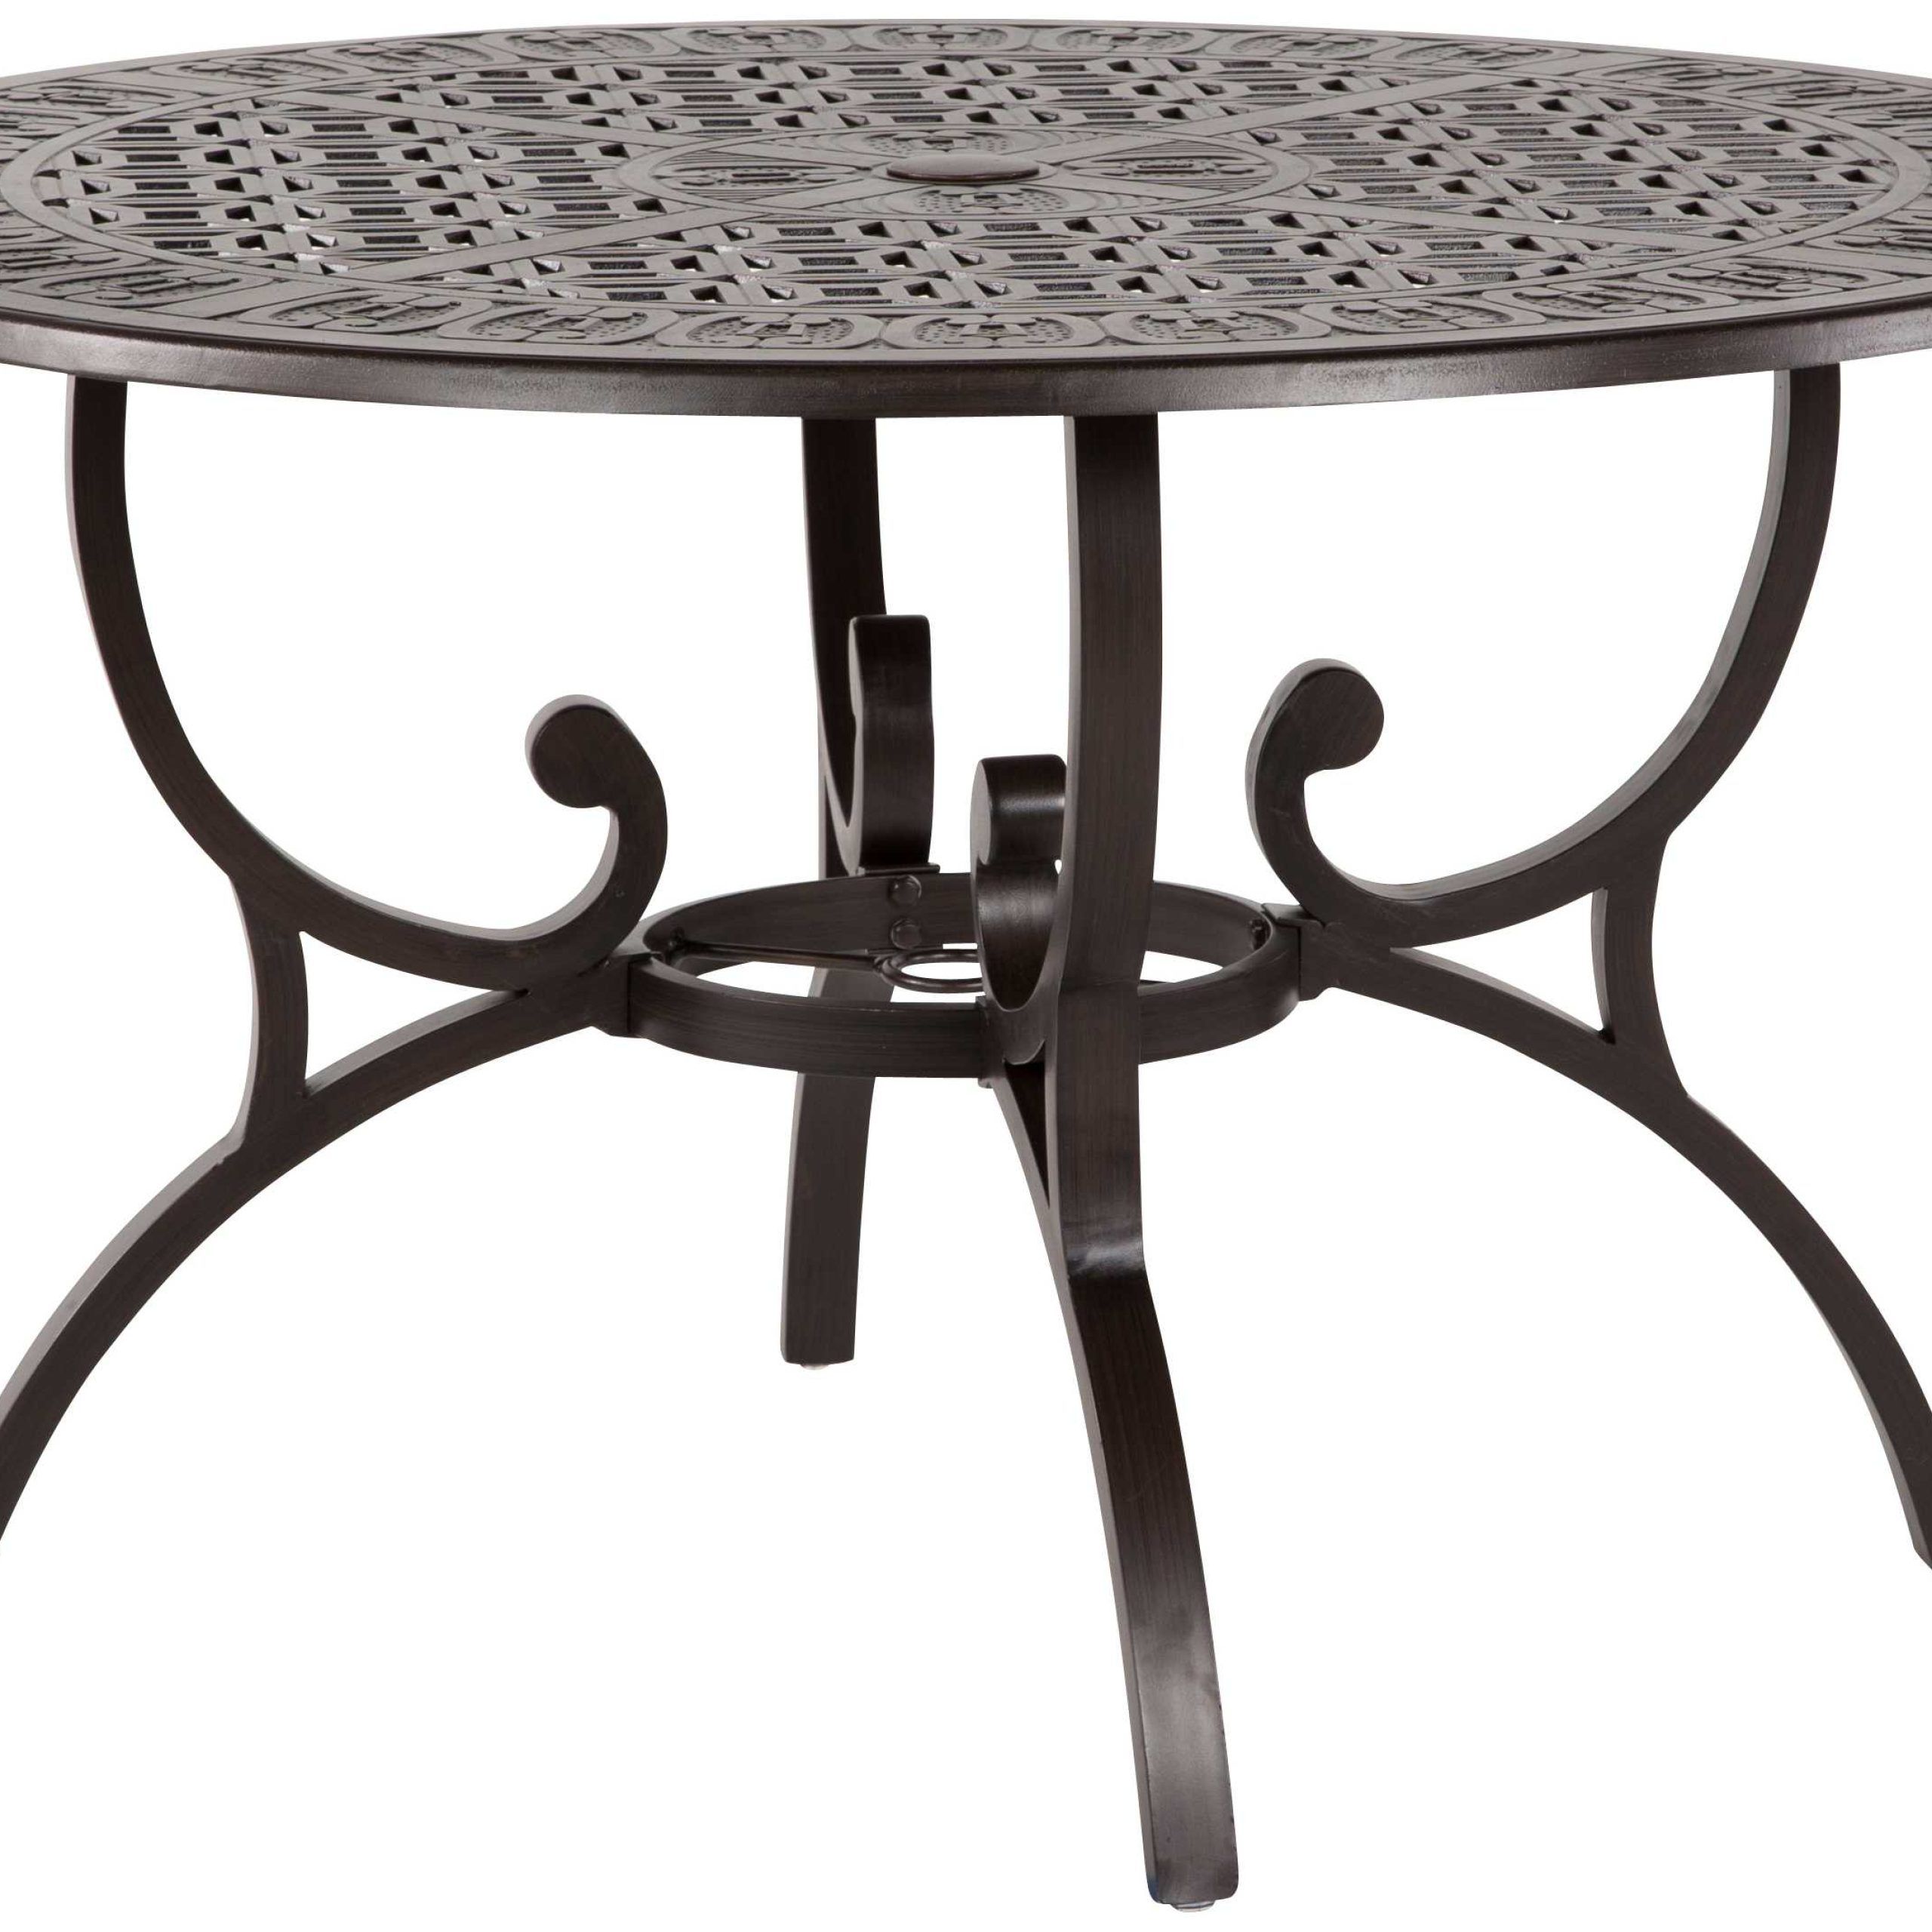 Round Black Patio Coffee Table : Polywood Round Outdoor Coffee Table 38 For Round Steel Patio Coffee Tables (View 20 of 20)